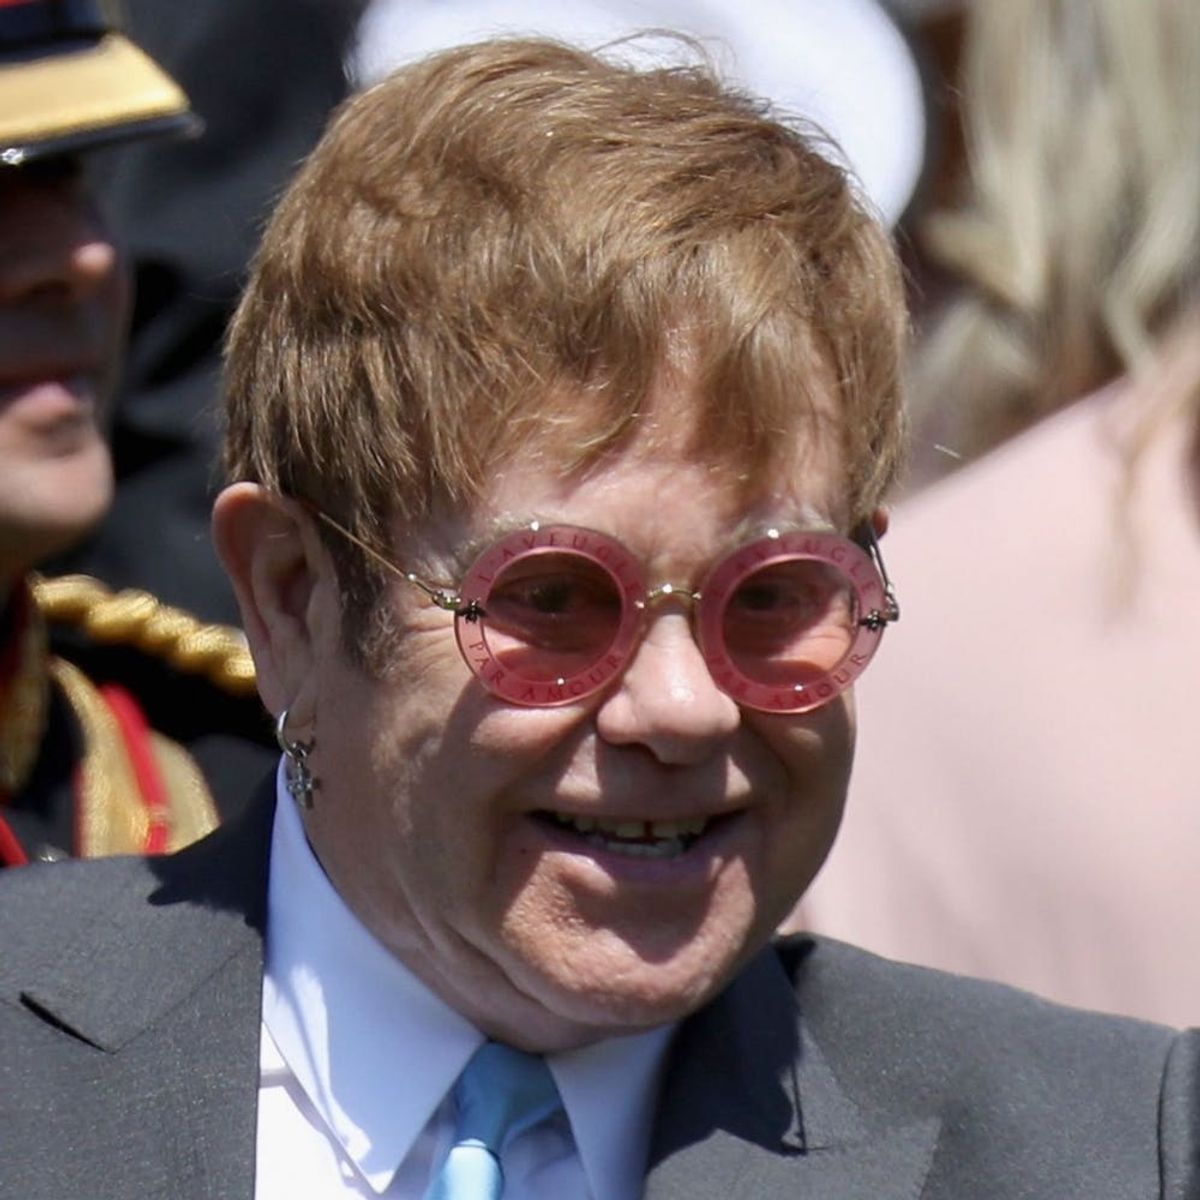 All the Songs Sir Elton John Performed for Meghan Markle and Prince Harry’s Royal Wedding Reception